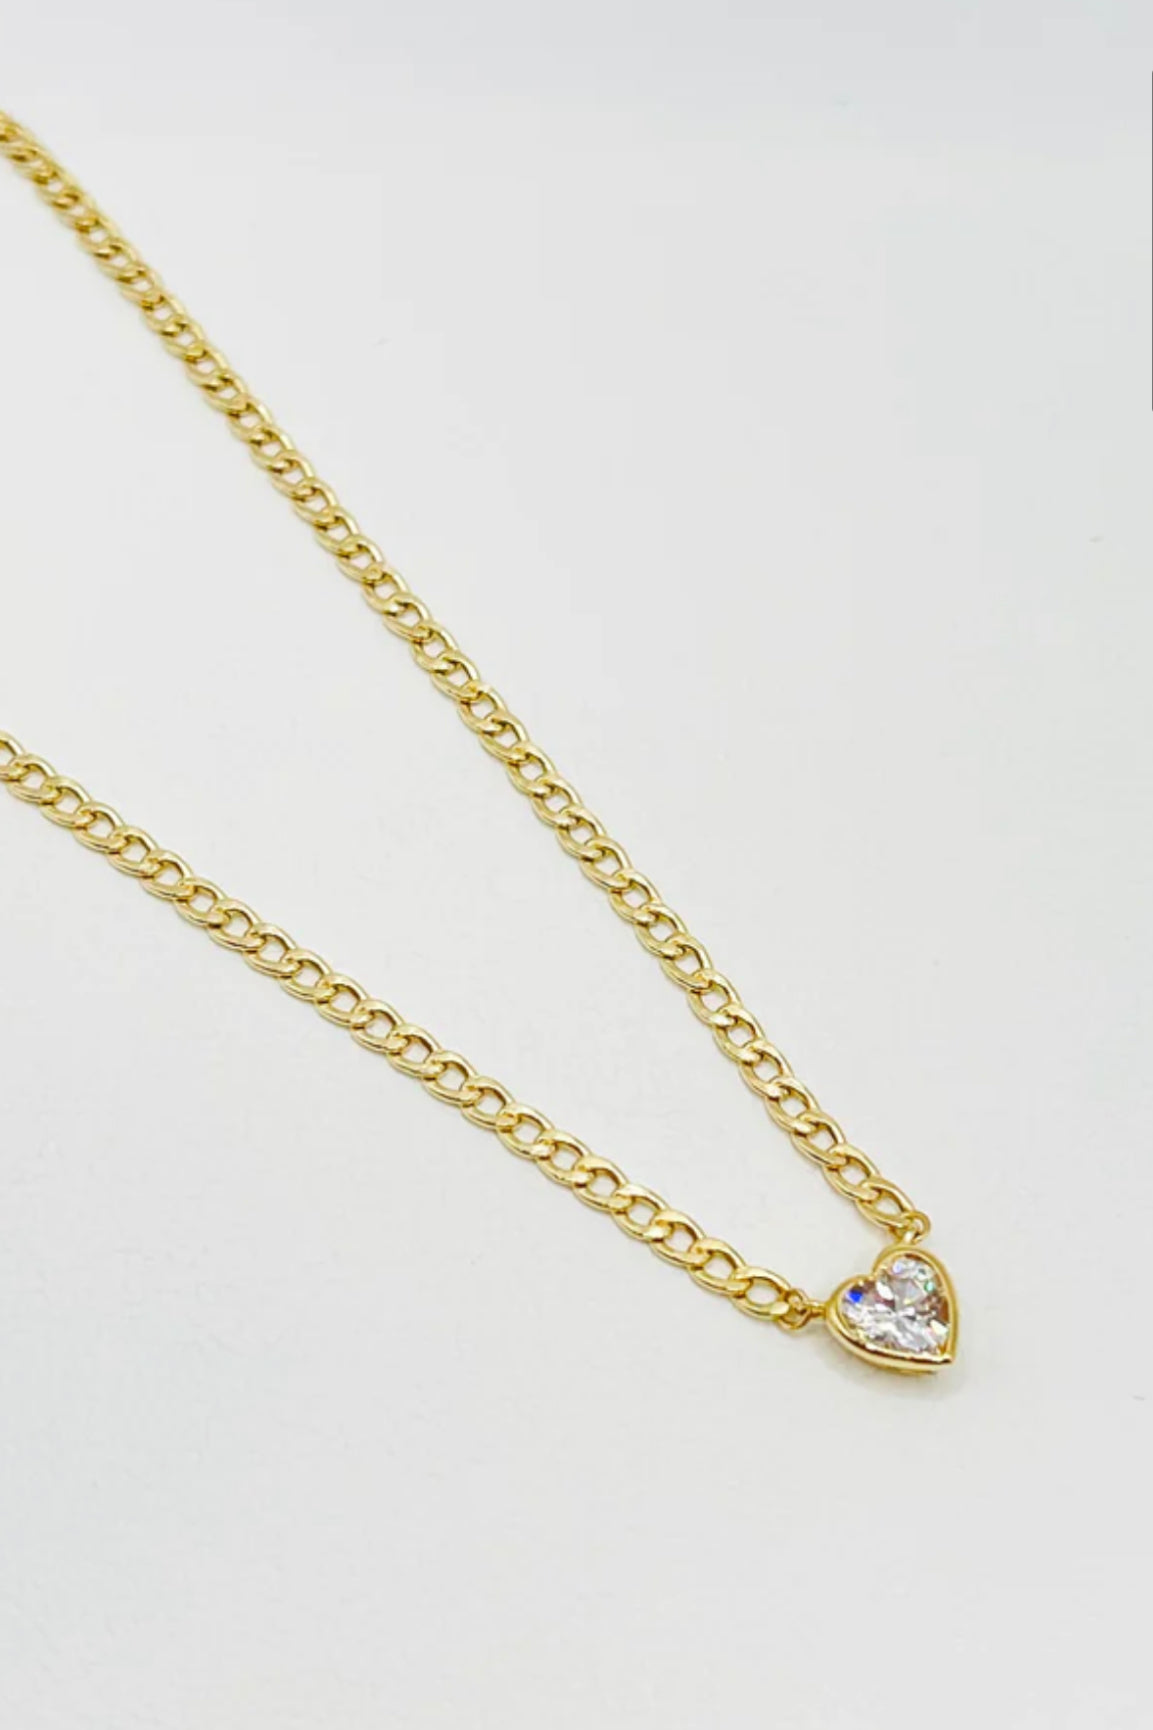 Fancy CZ Heart and Cuban link Necklace